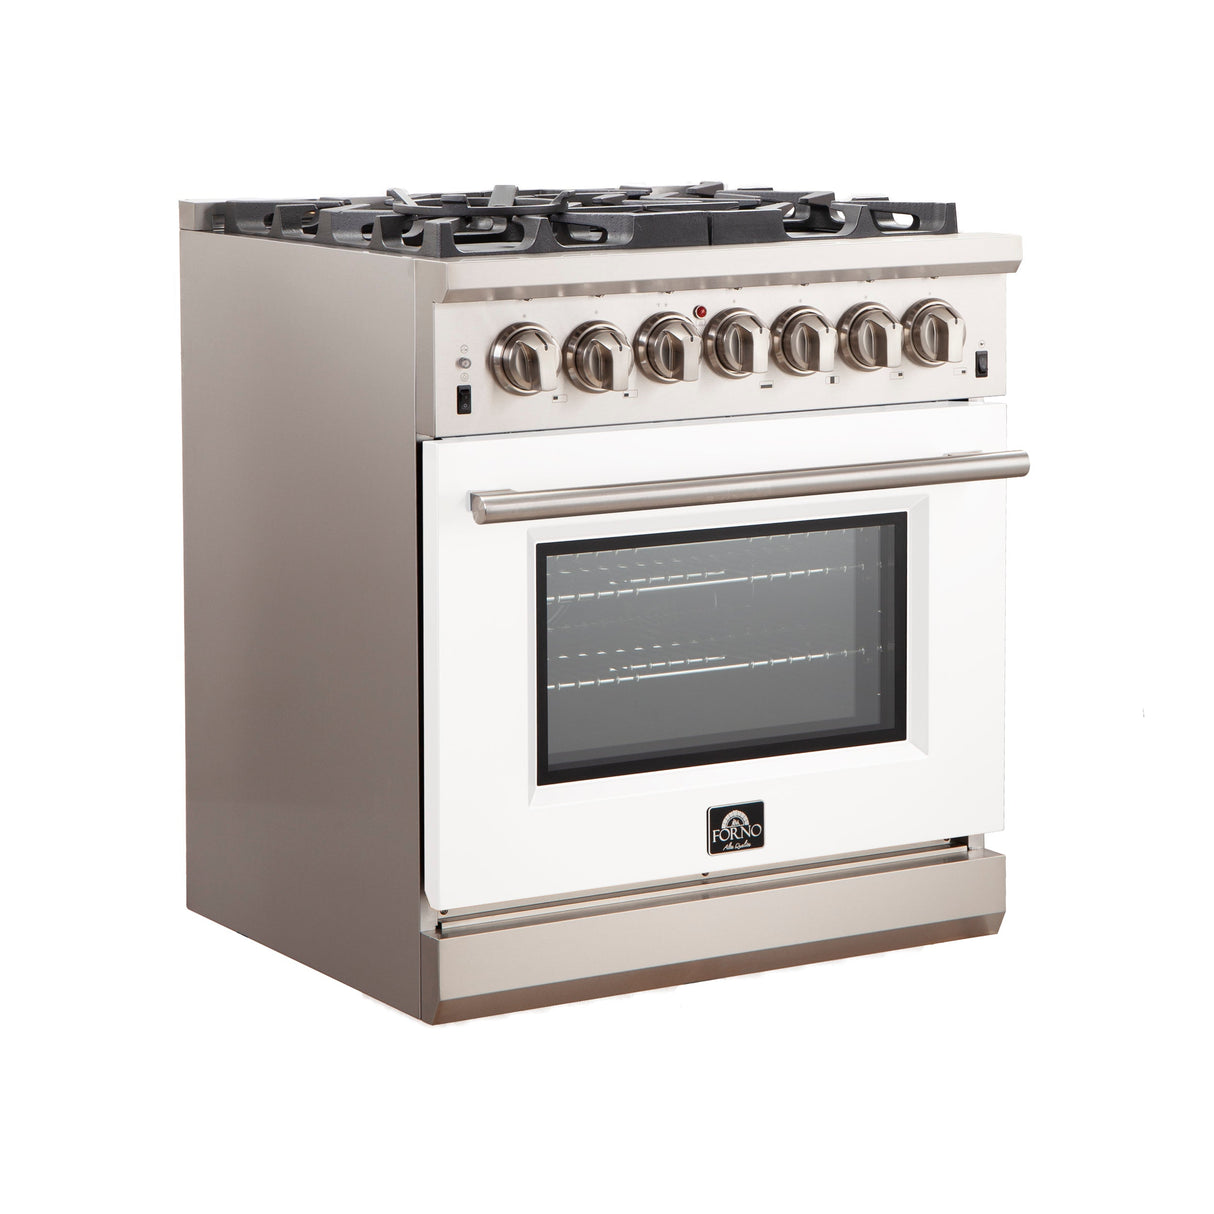 Forno 30-Inch Capriasca Gas Range with 5 Burners and Convection Oven in Stainless Steel with White Door (FFSGS6260-30WHT)